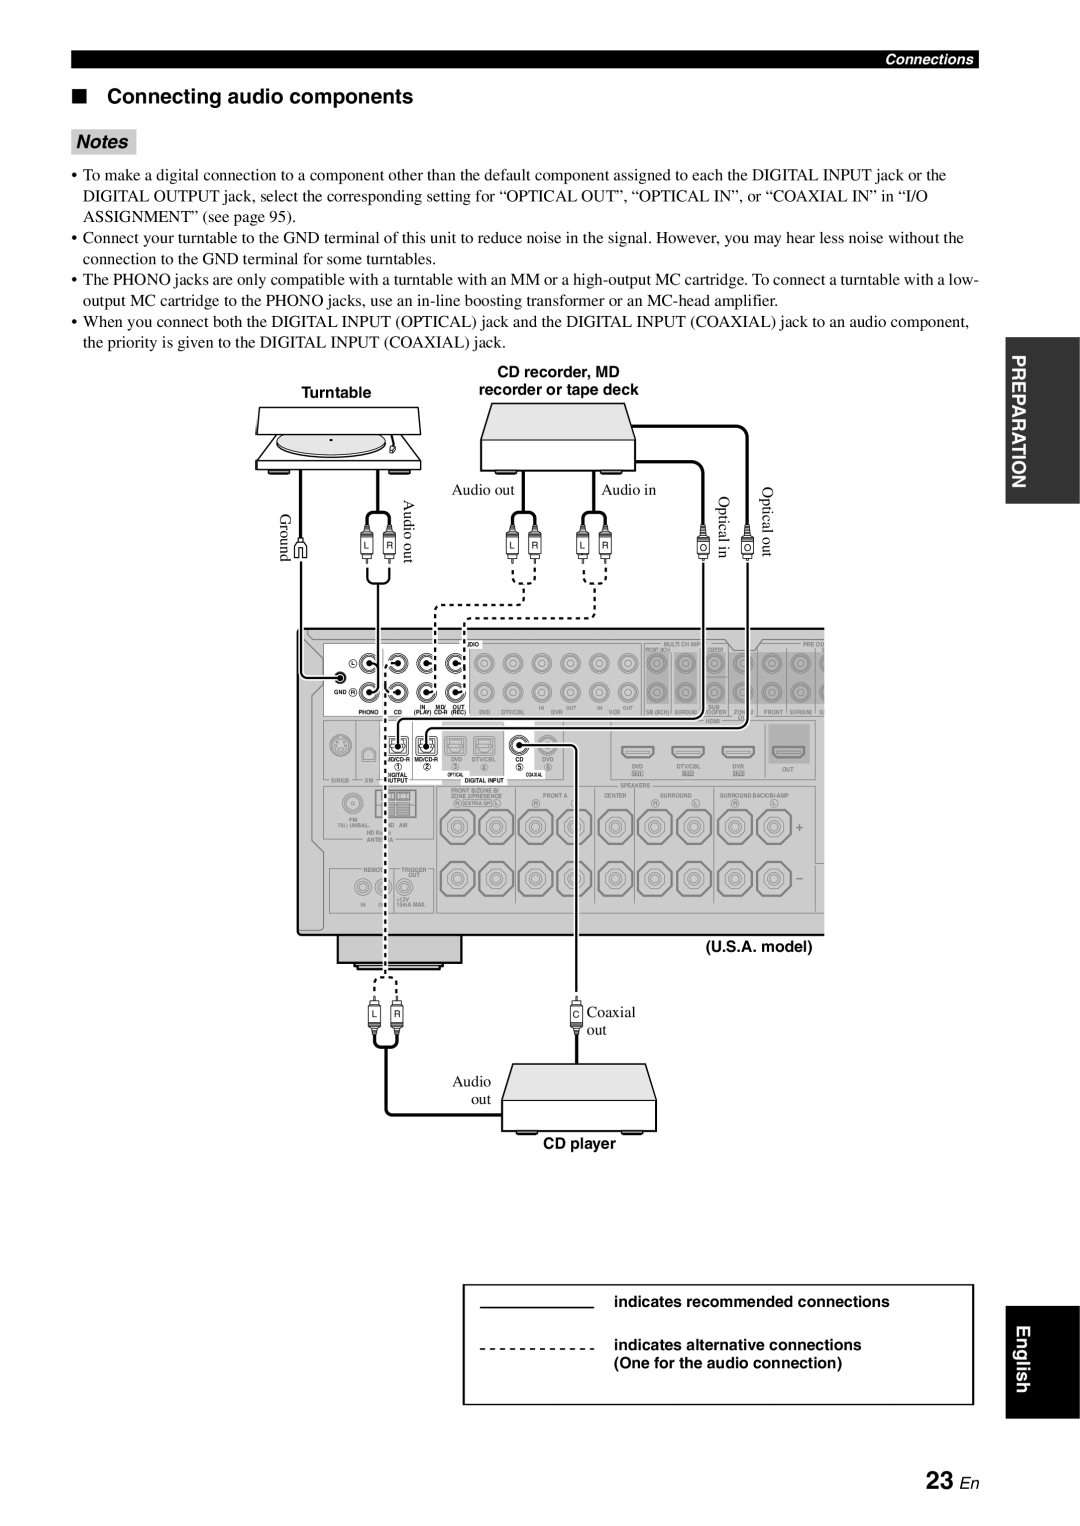 Yamaha RX-V863 owner manual 23 En, Connecting audio components, Notes 